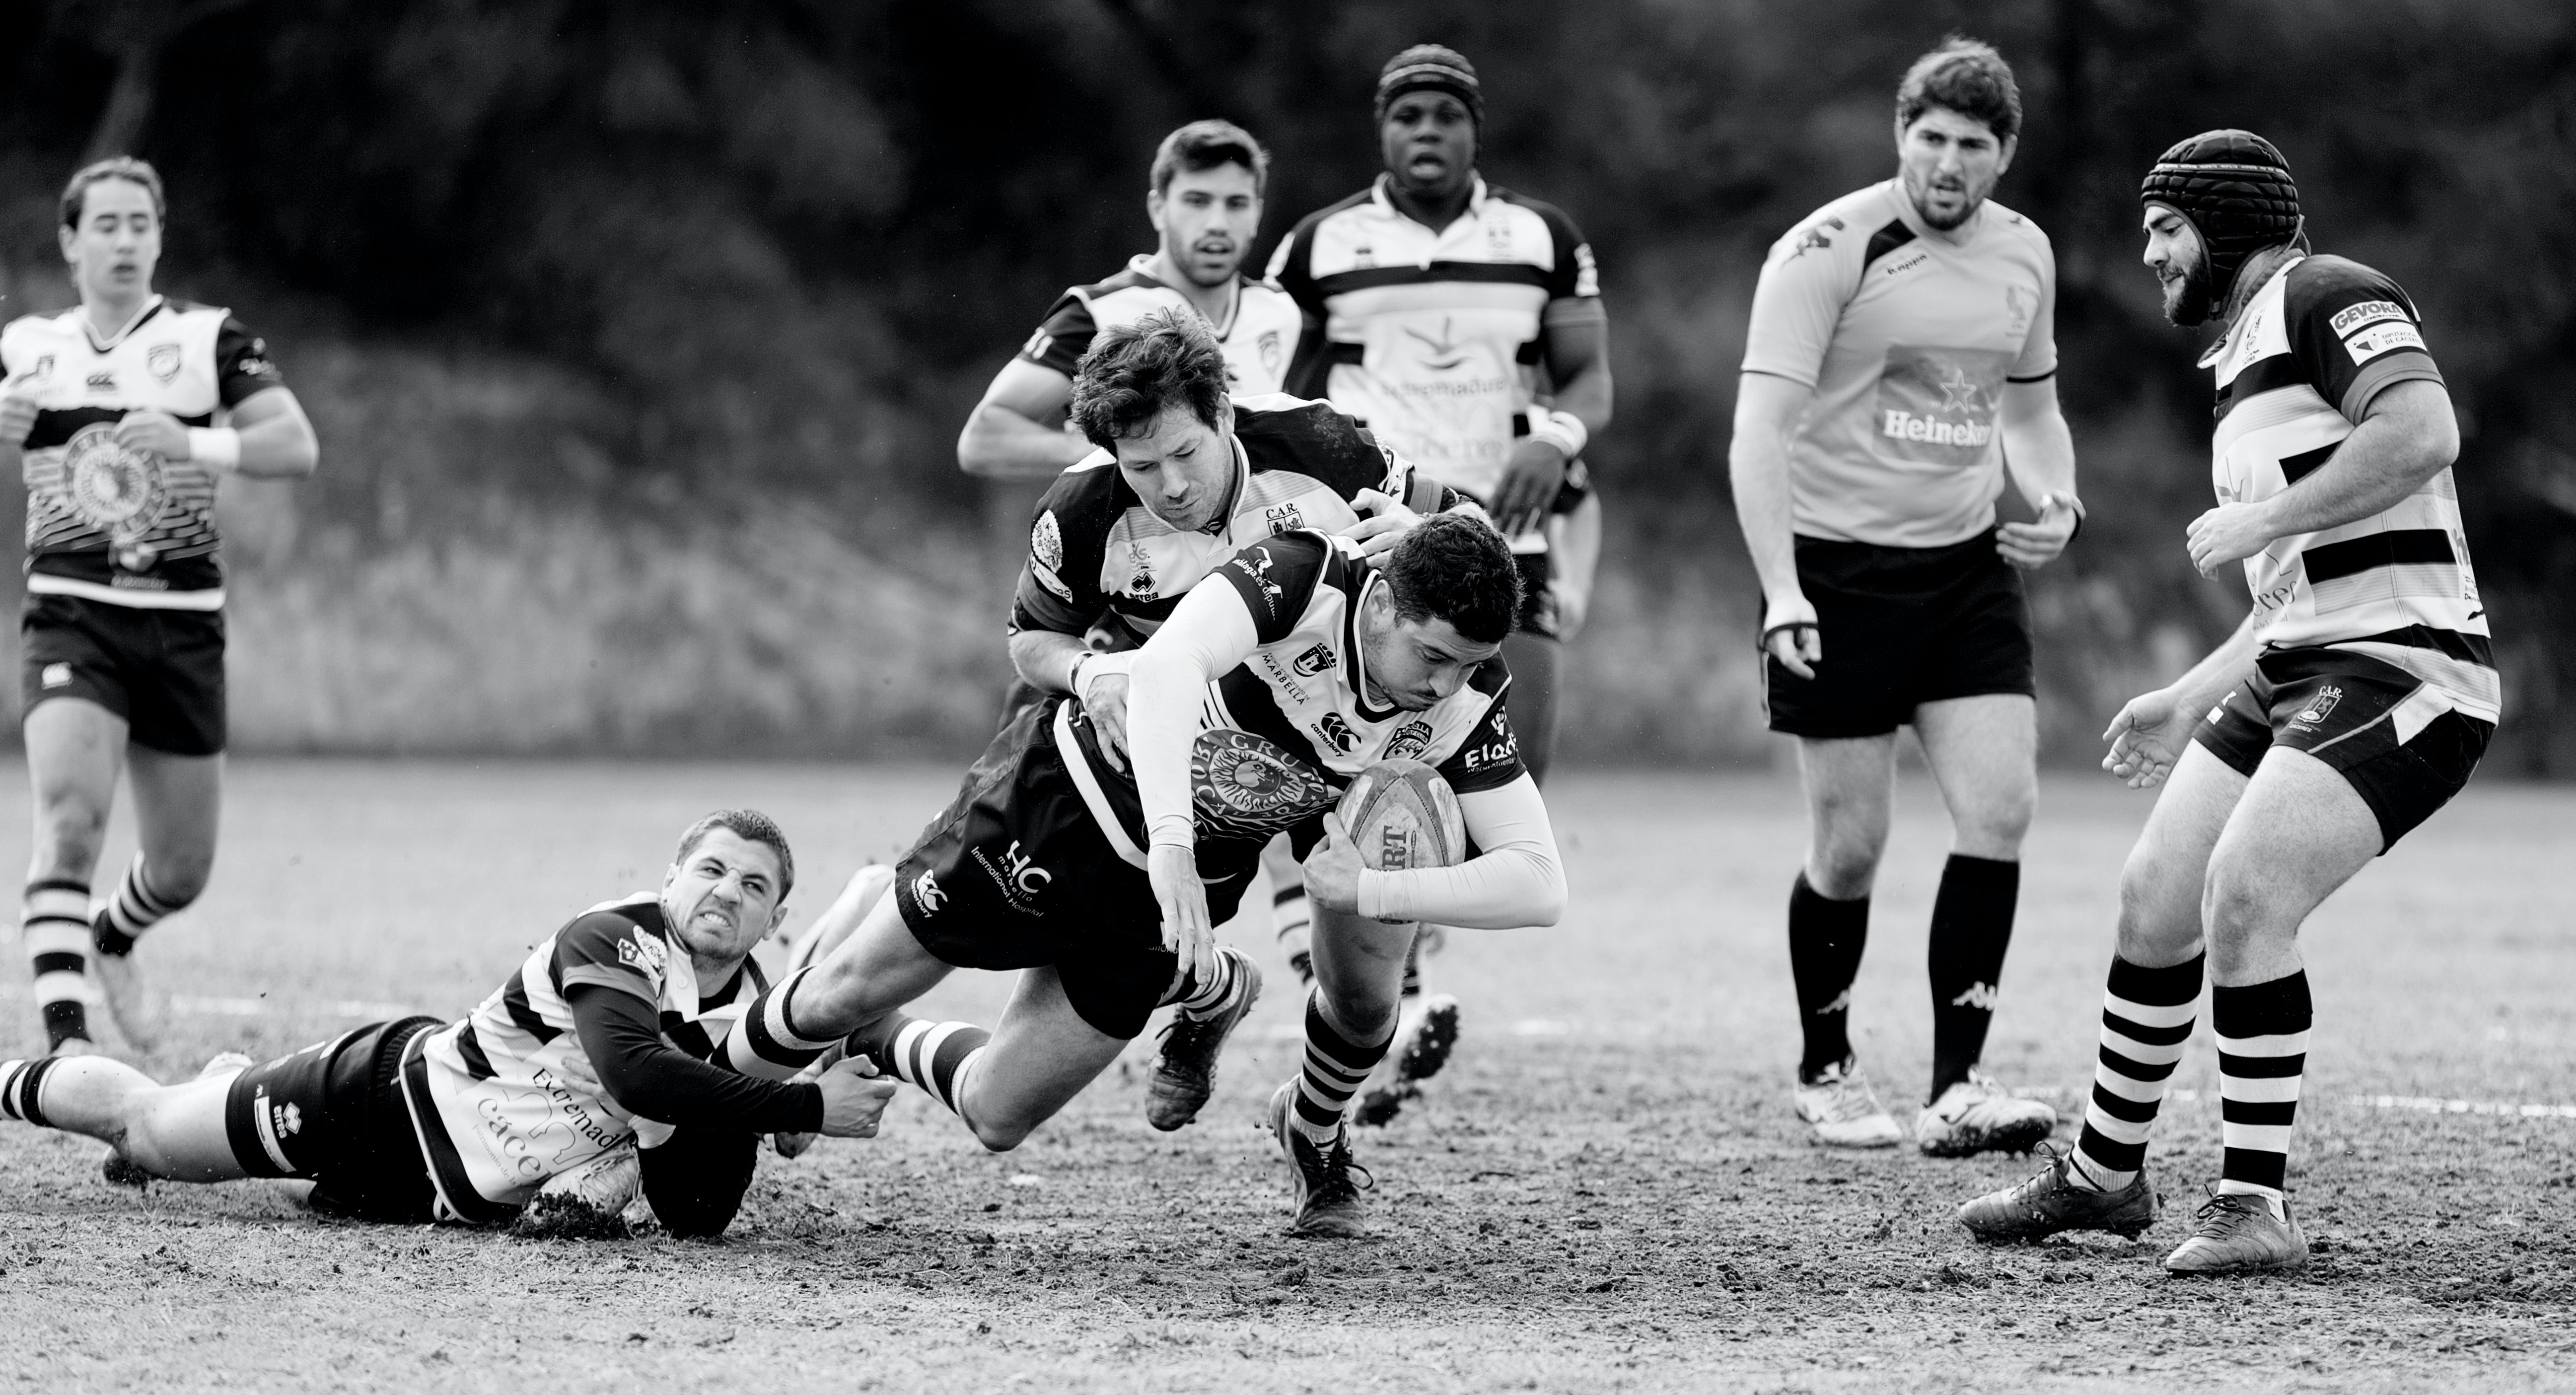 quino al GyuWu0ynutE unsplash - Combat conditioning of battles in Rugby